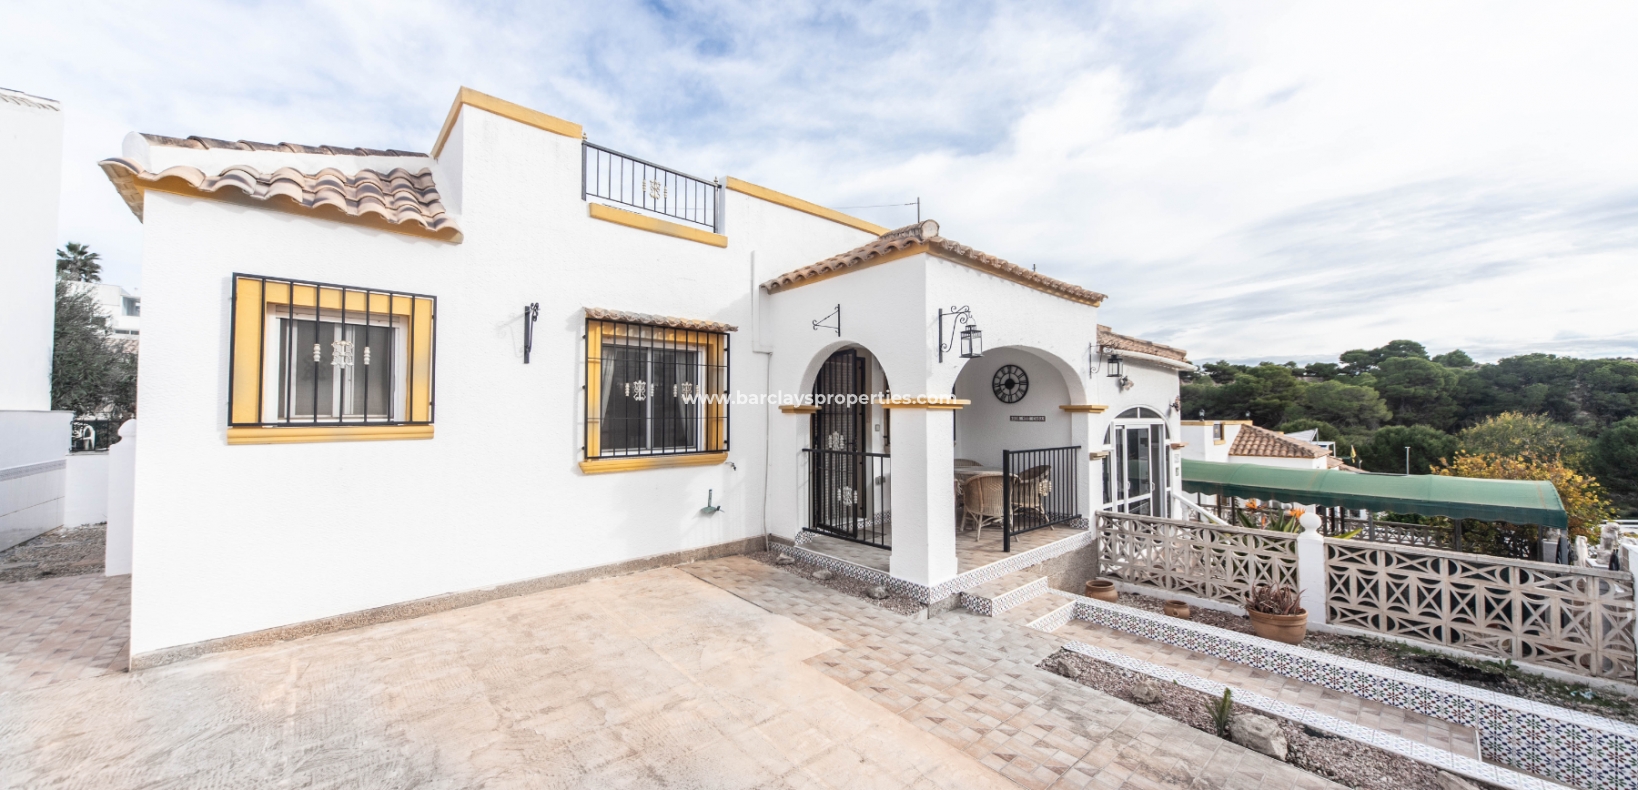 Quad Property for sale in Costa Blanca